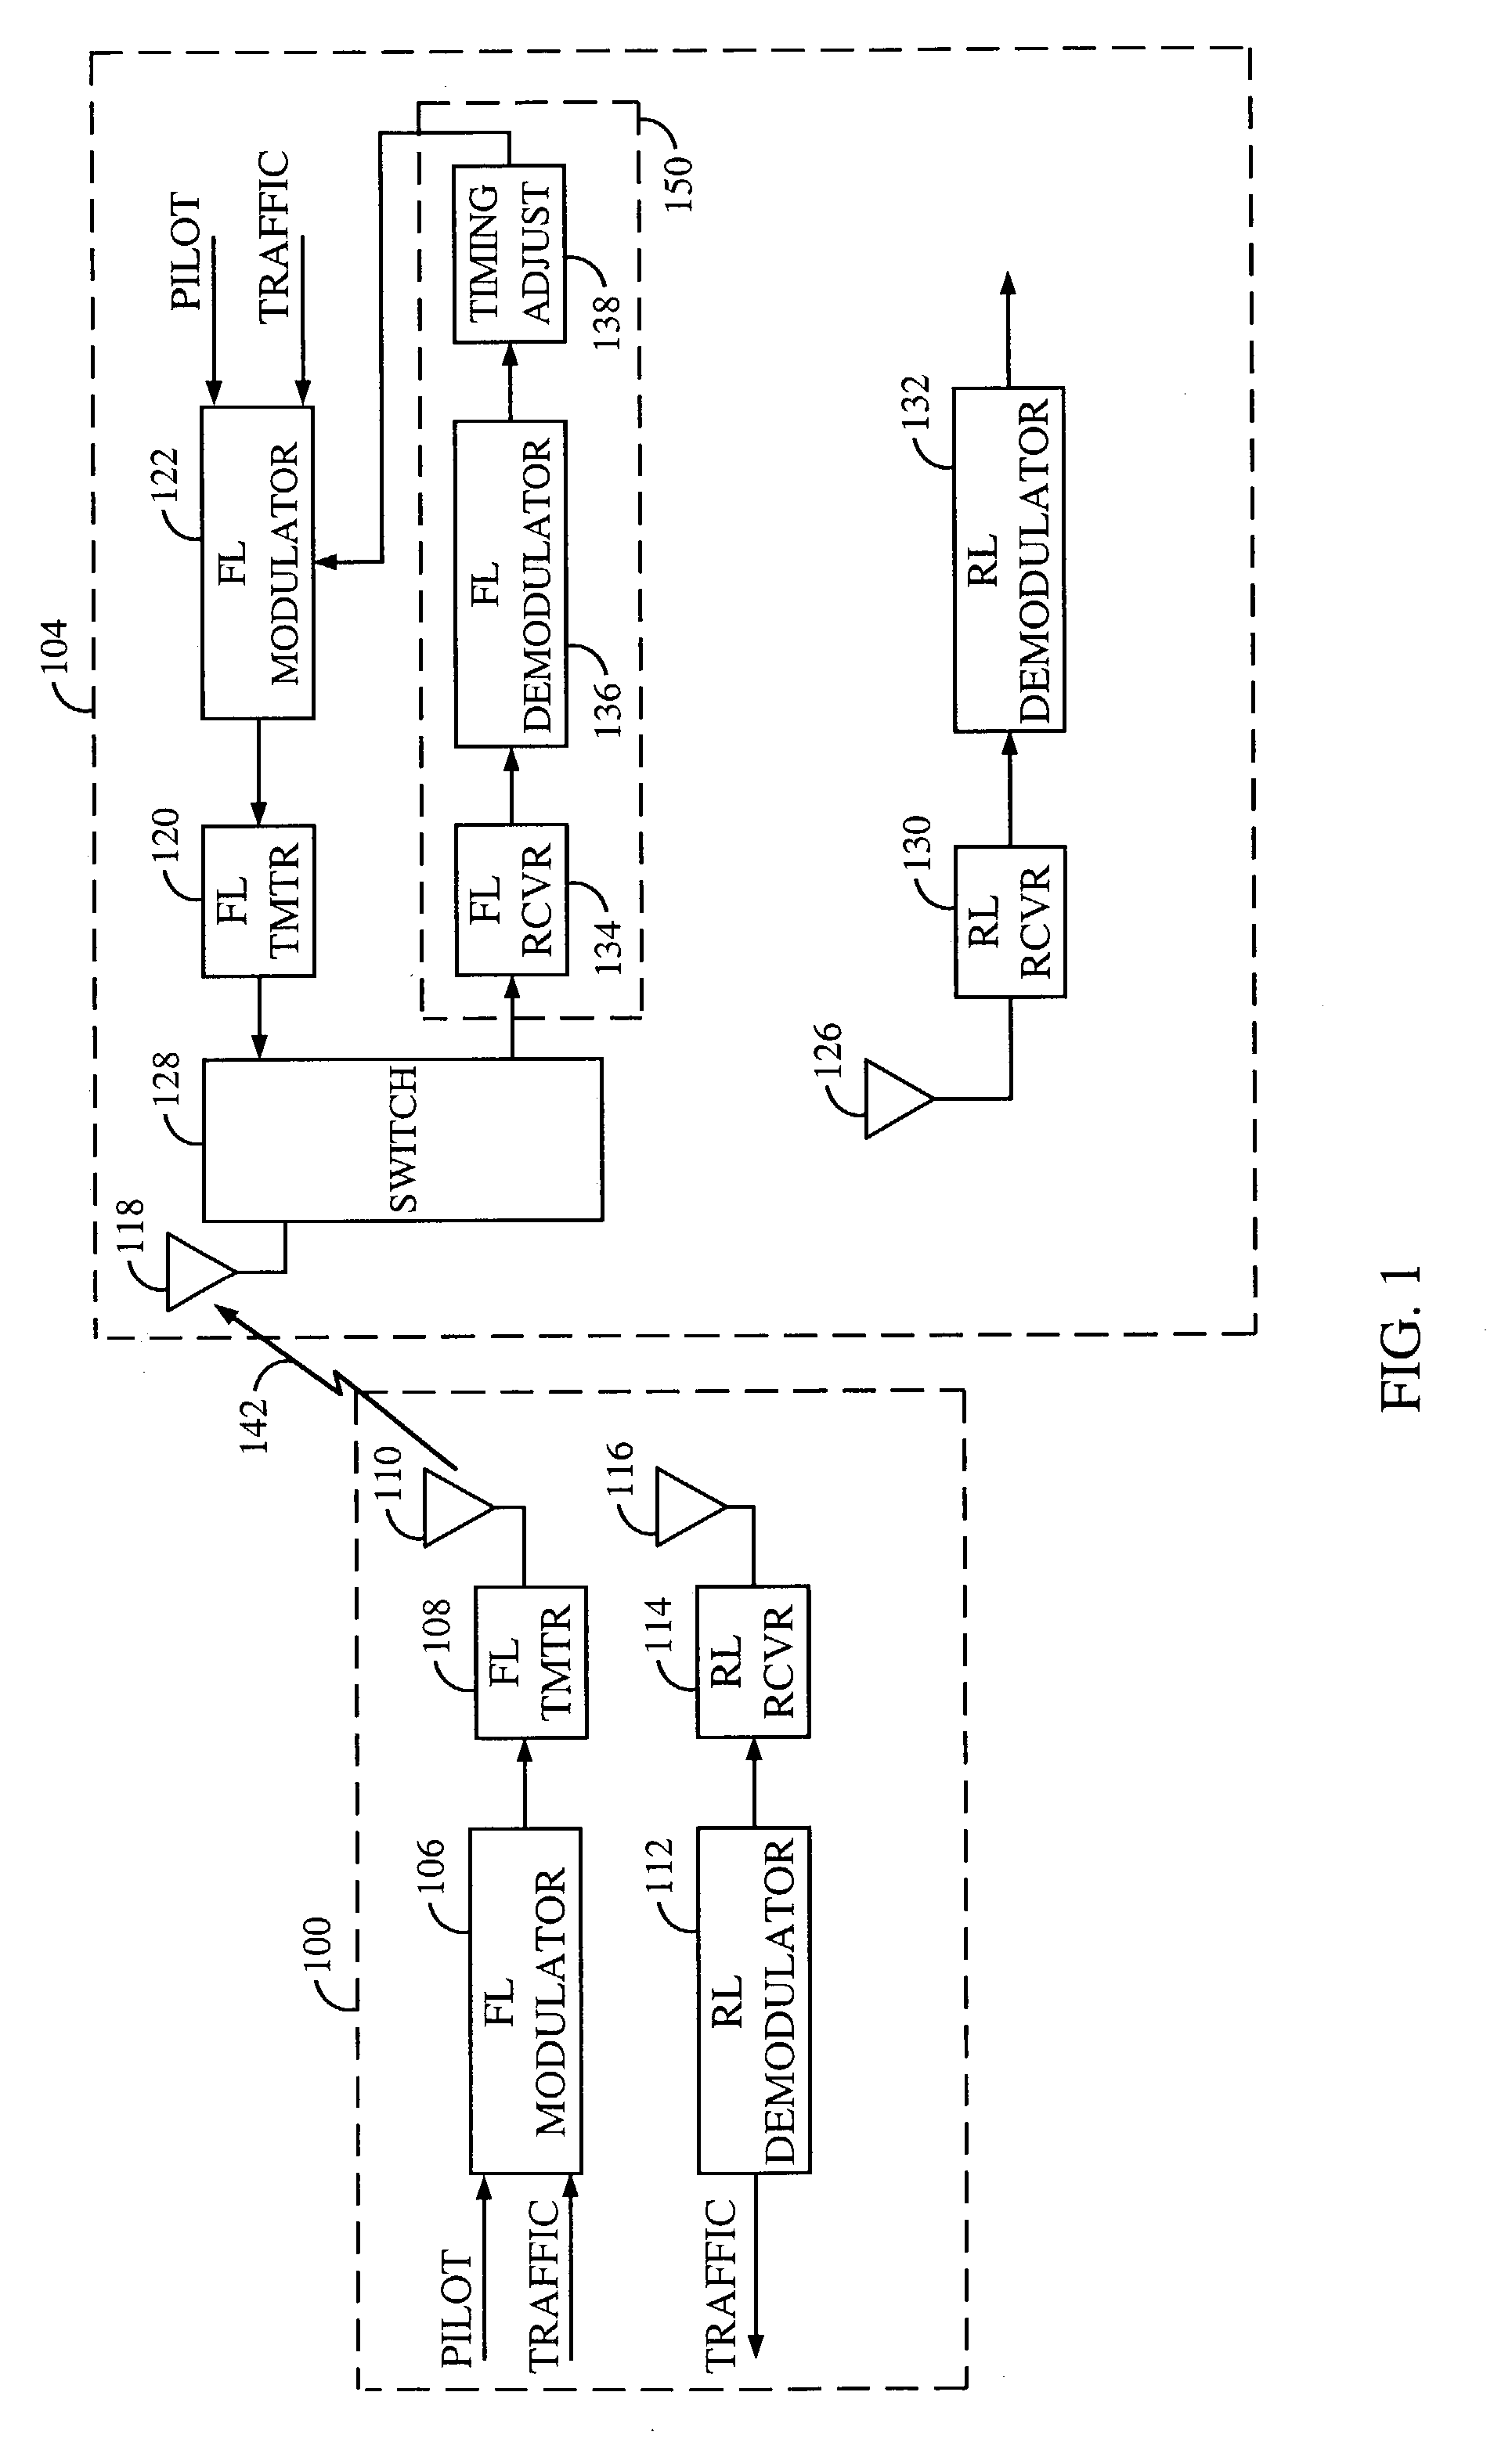 Method and apparatus for providing wireless communication system synchronization